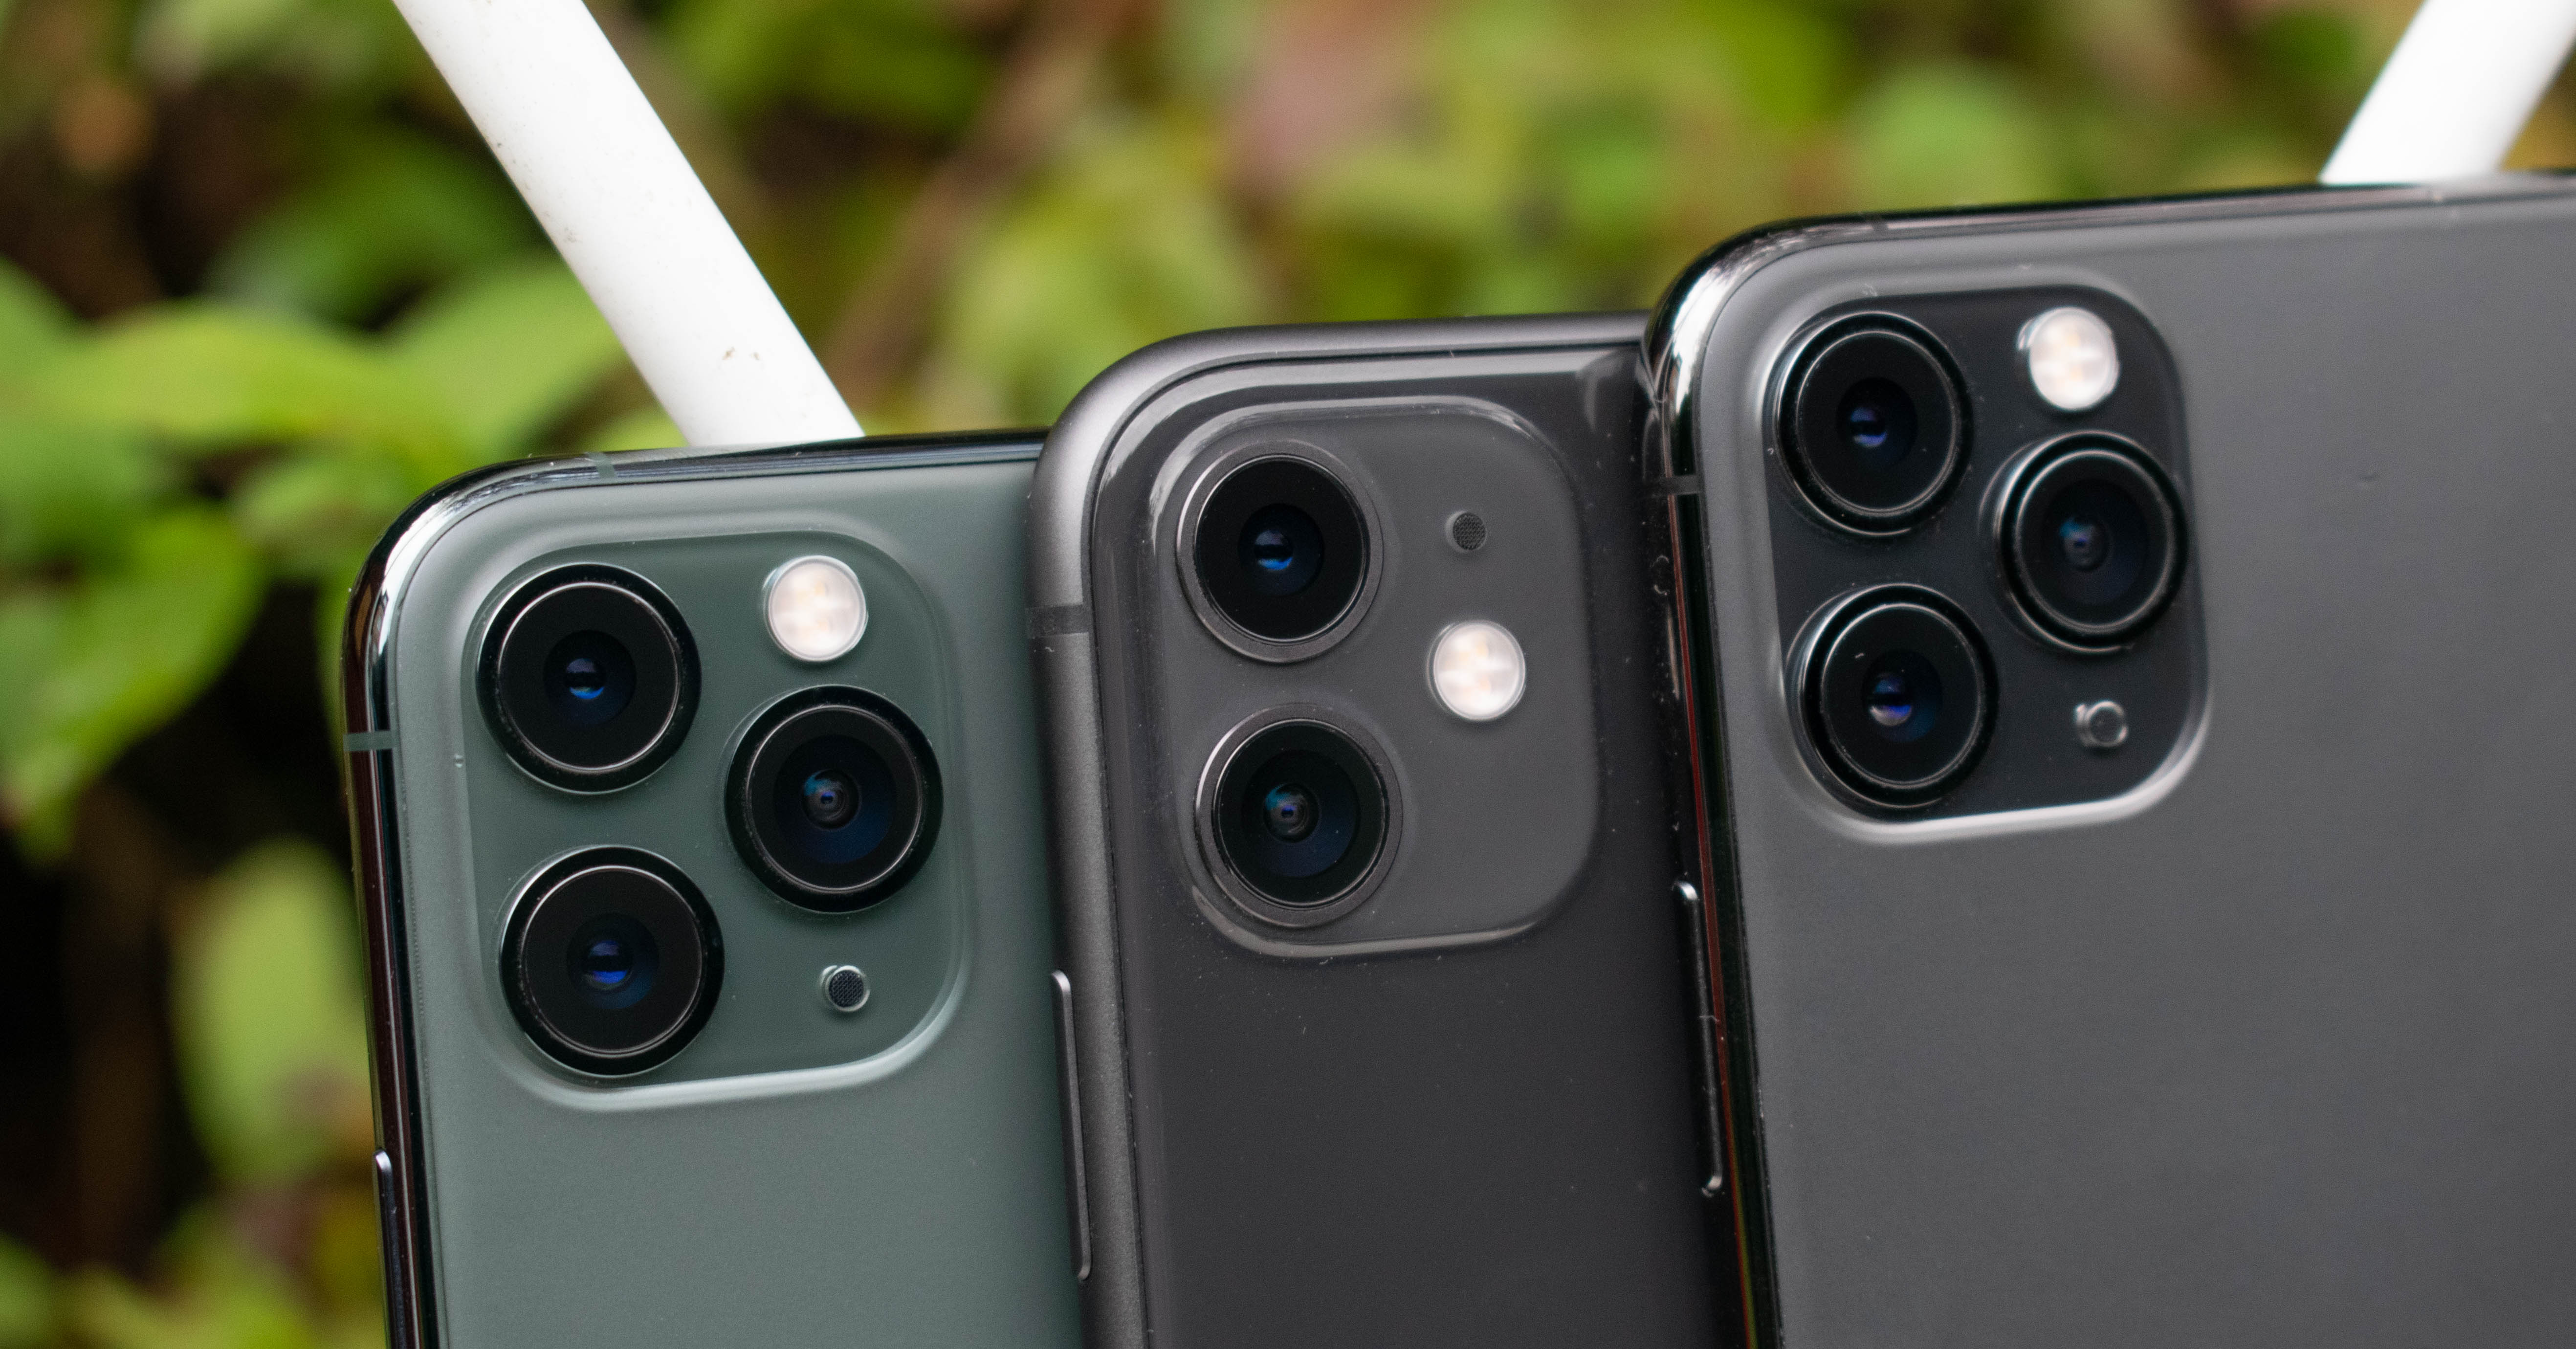 Camera Daylight Evaluation Triple Cameras The Apple Iphone 11 11 Pro 11 Pro Max Review Performance Battery Camera Elevated